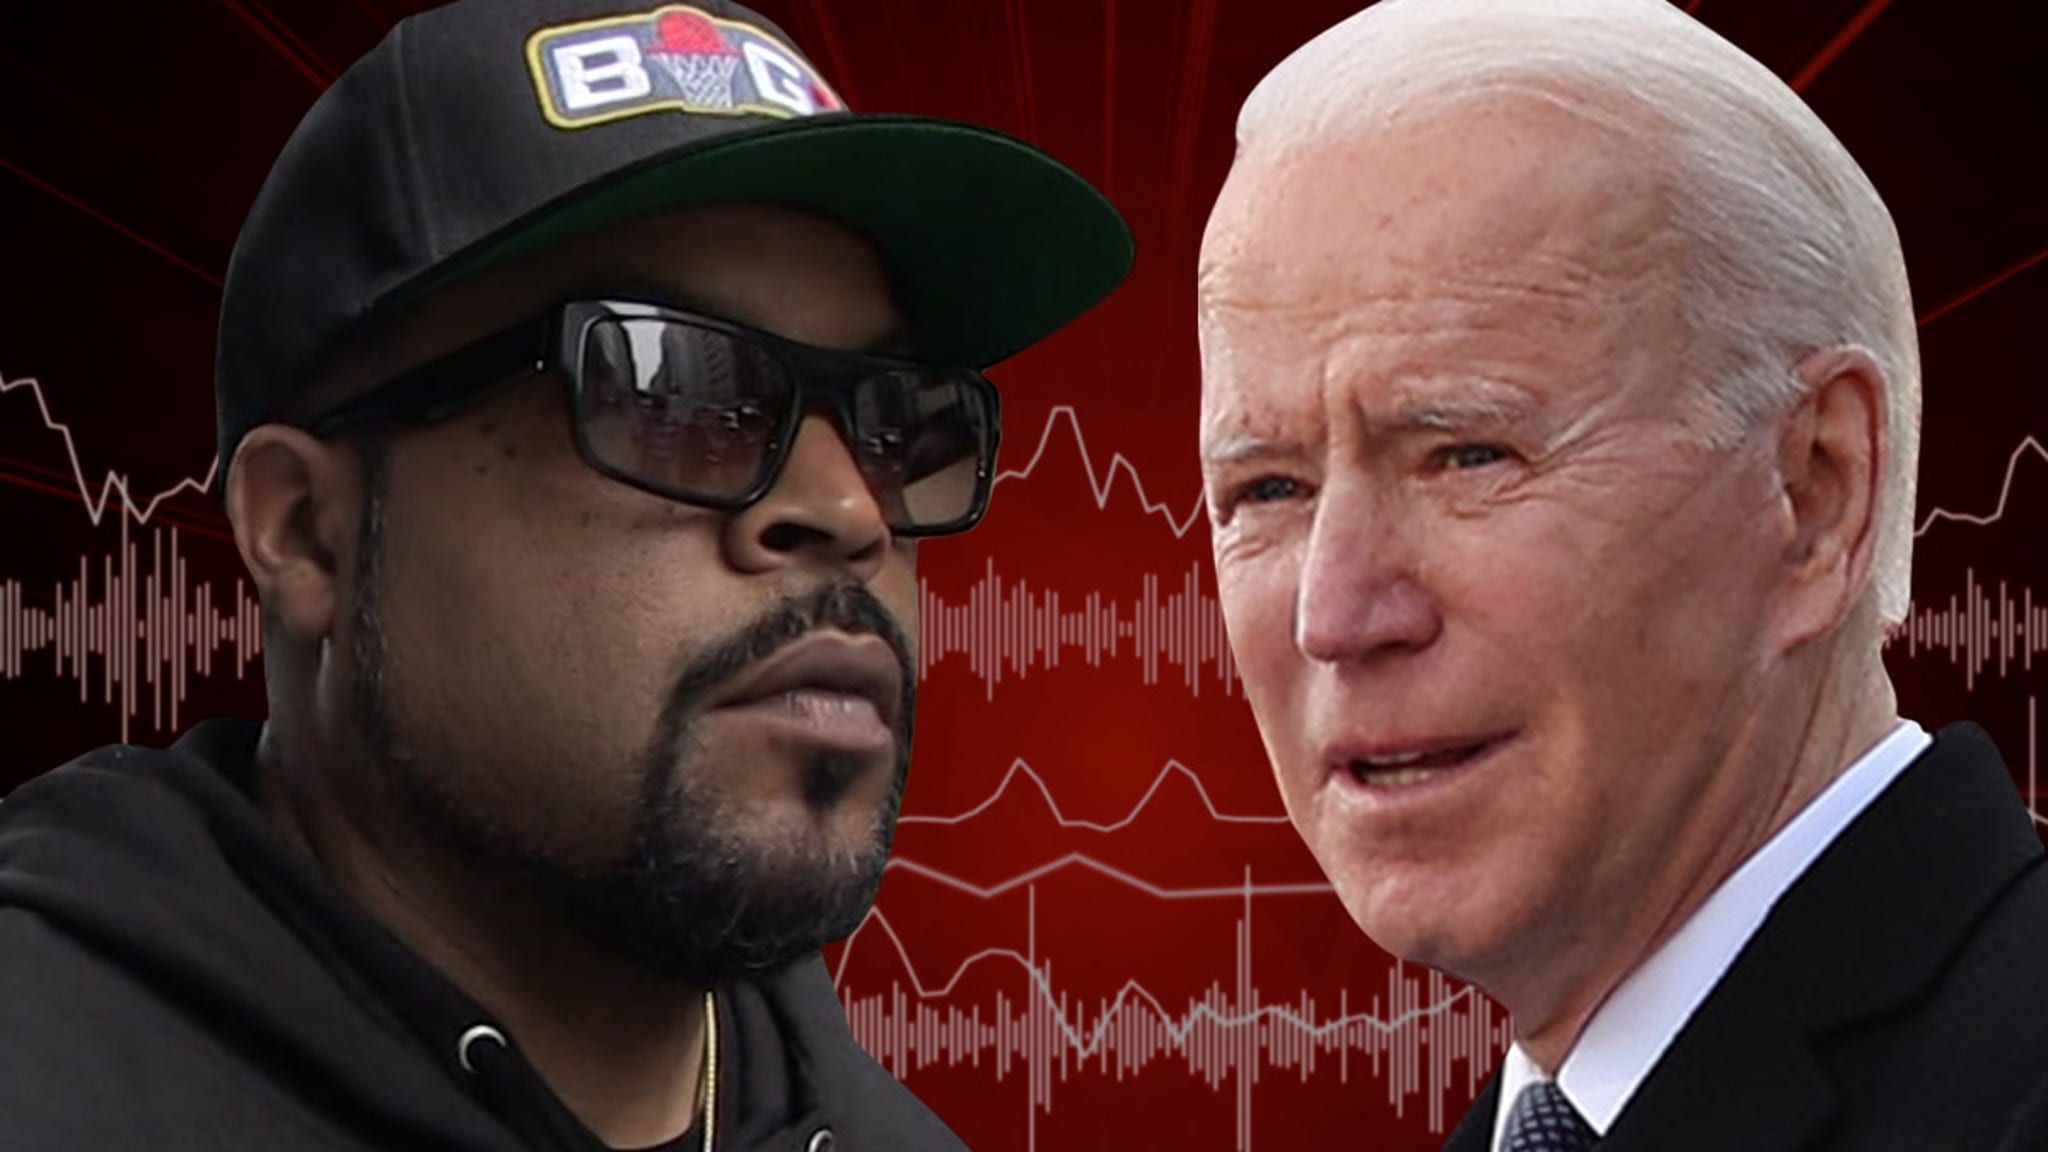 Ice Cube to meet President Biden under contract with Black America